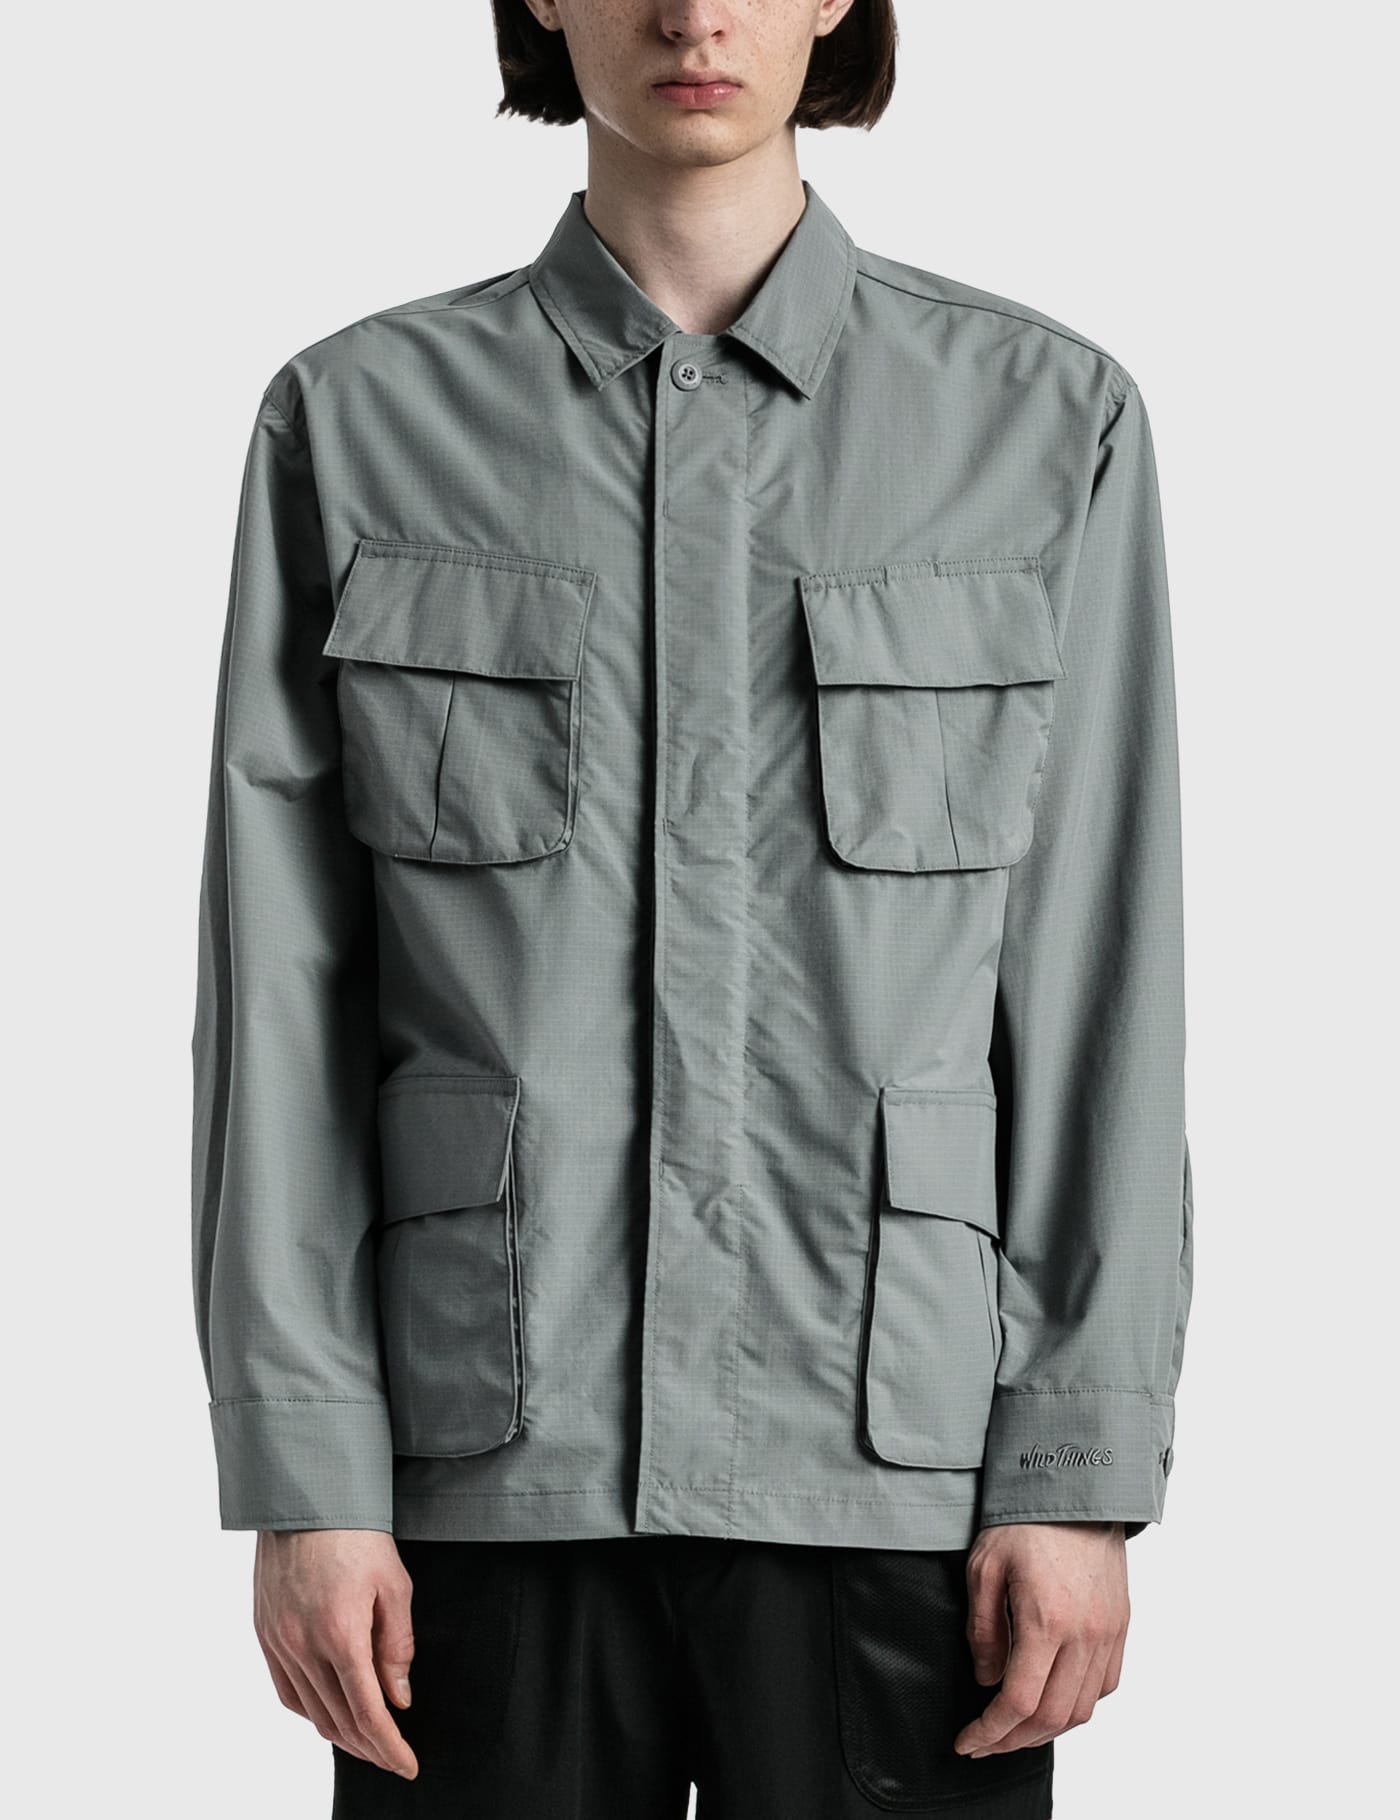 WILD THINGS - Dicros-Rip BDU Jacket | HBX - Globally Curated 